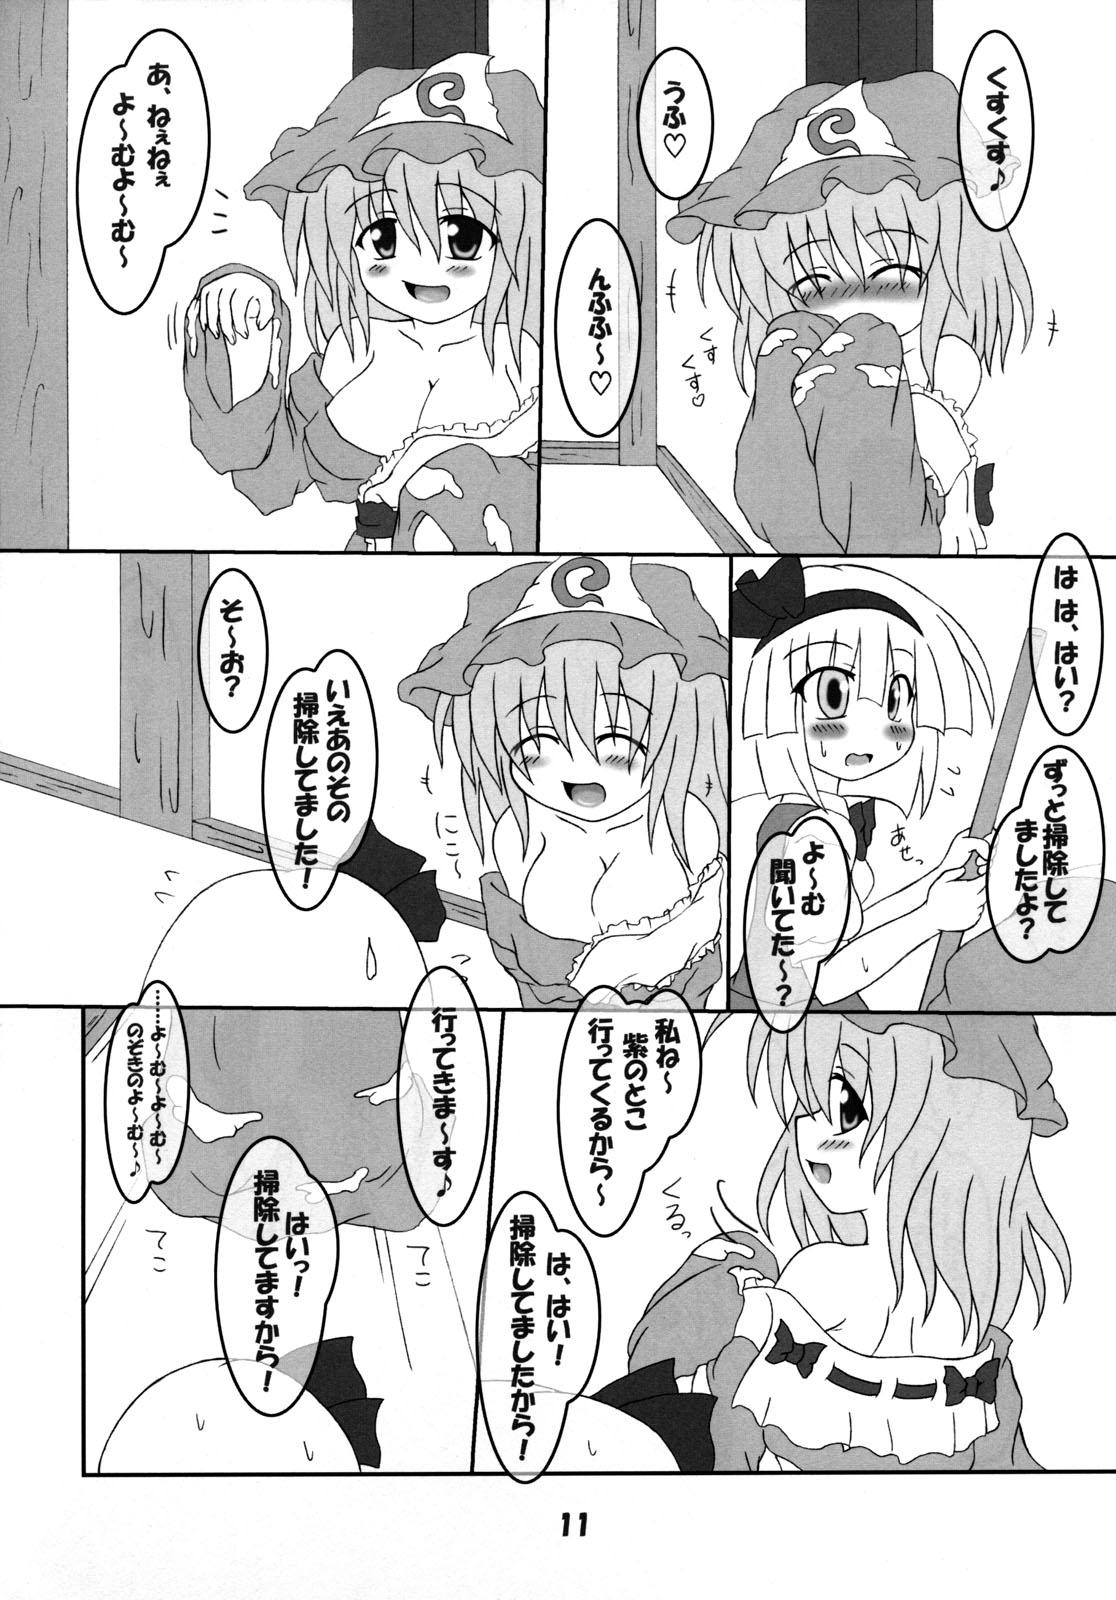 Pareja Rollin 24 - Touhou project Trans - Page 10